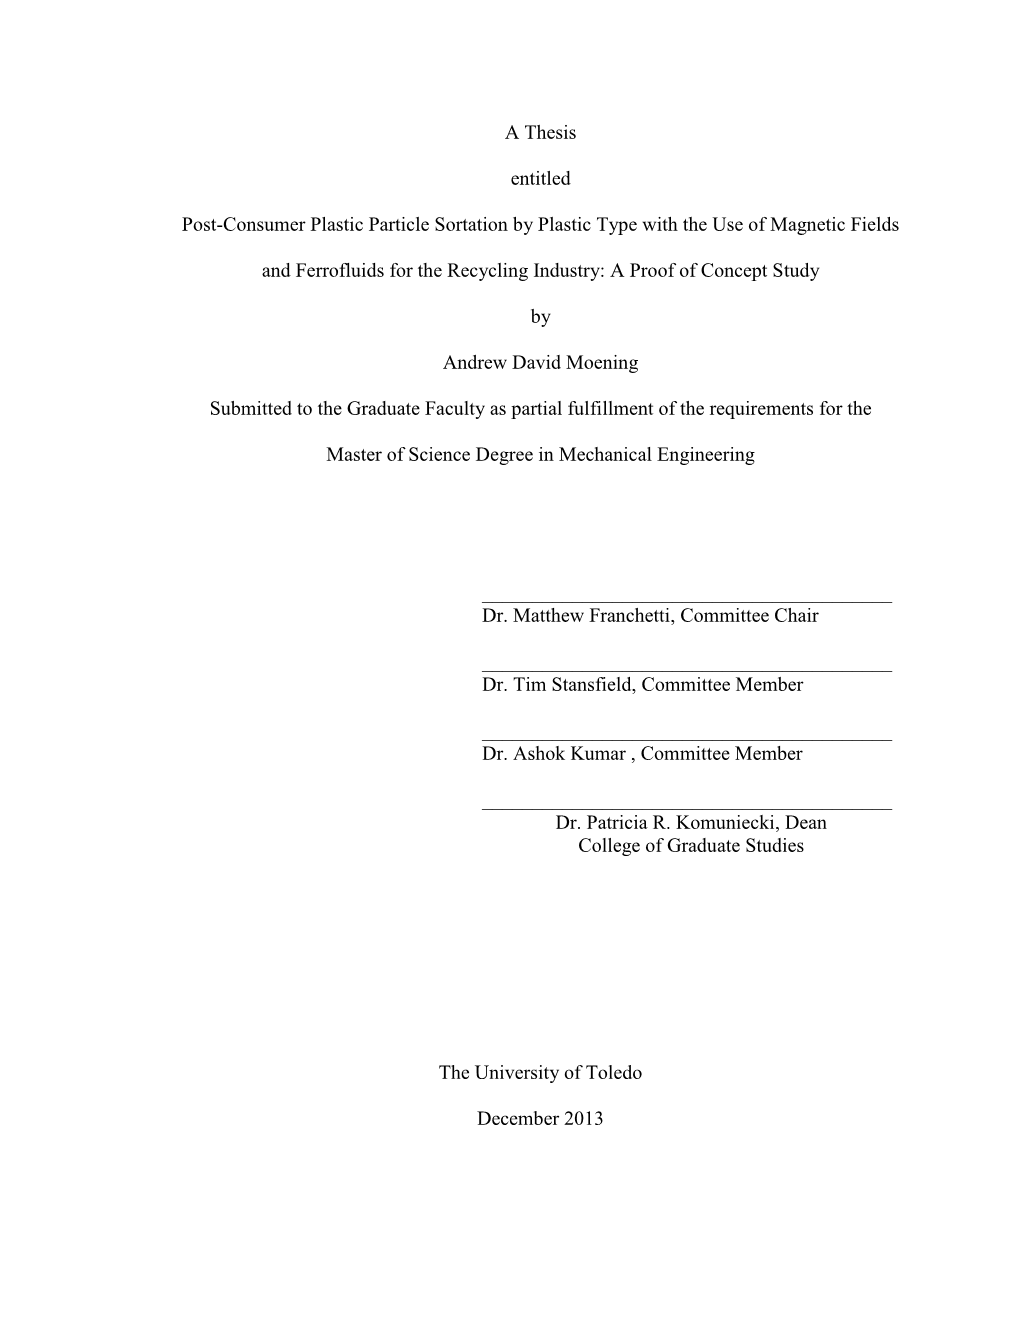 A Thesis Entitled Post-Consumer Plastic Particle Sortation by Plastic